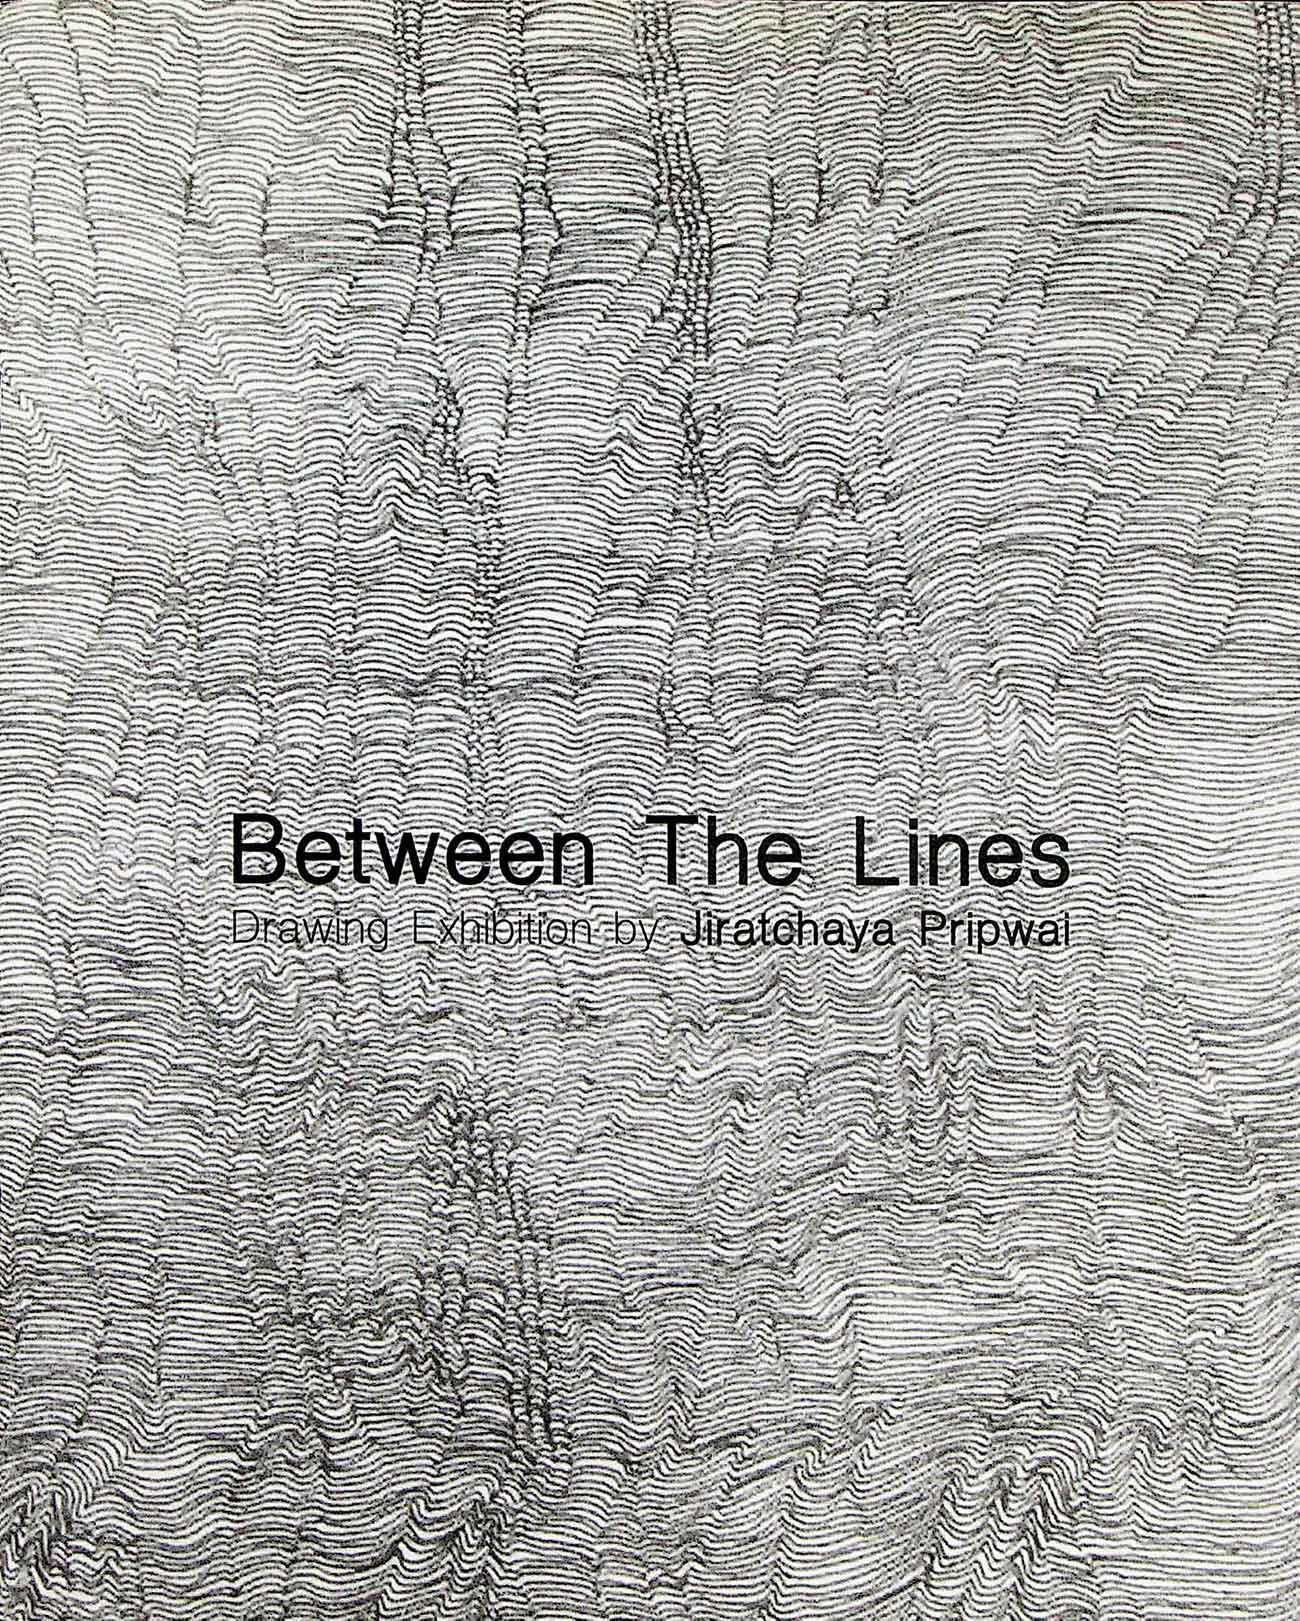 Between The Lines Drawing Exhibition by Jiratchaya Pripwai